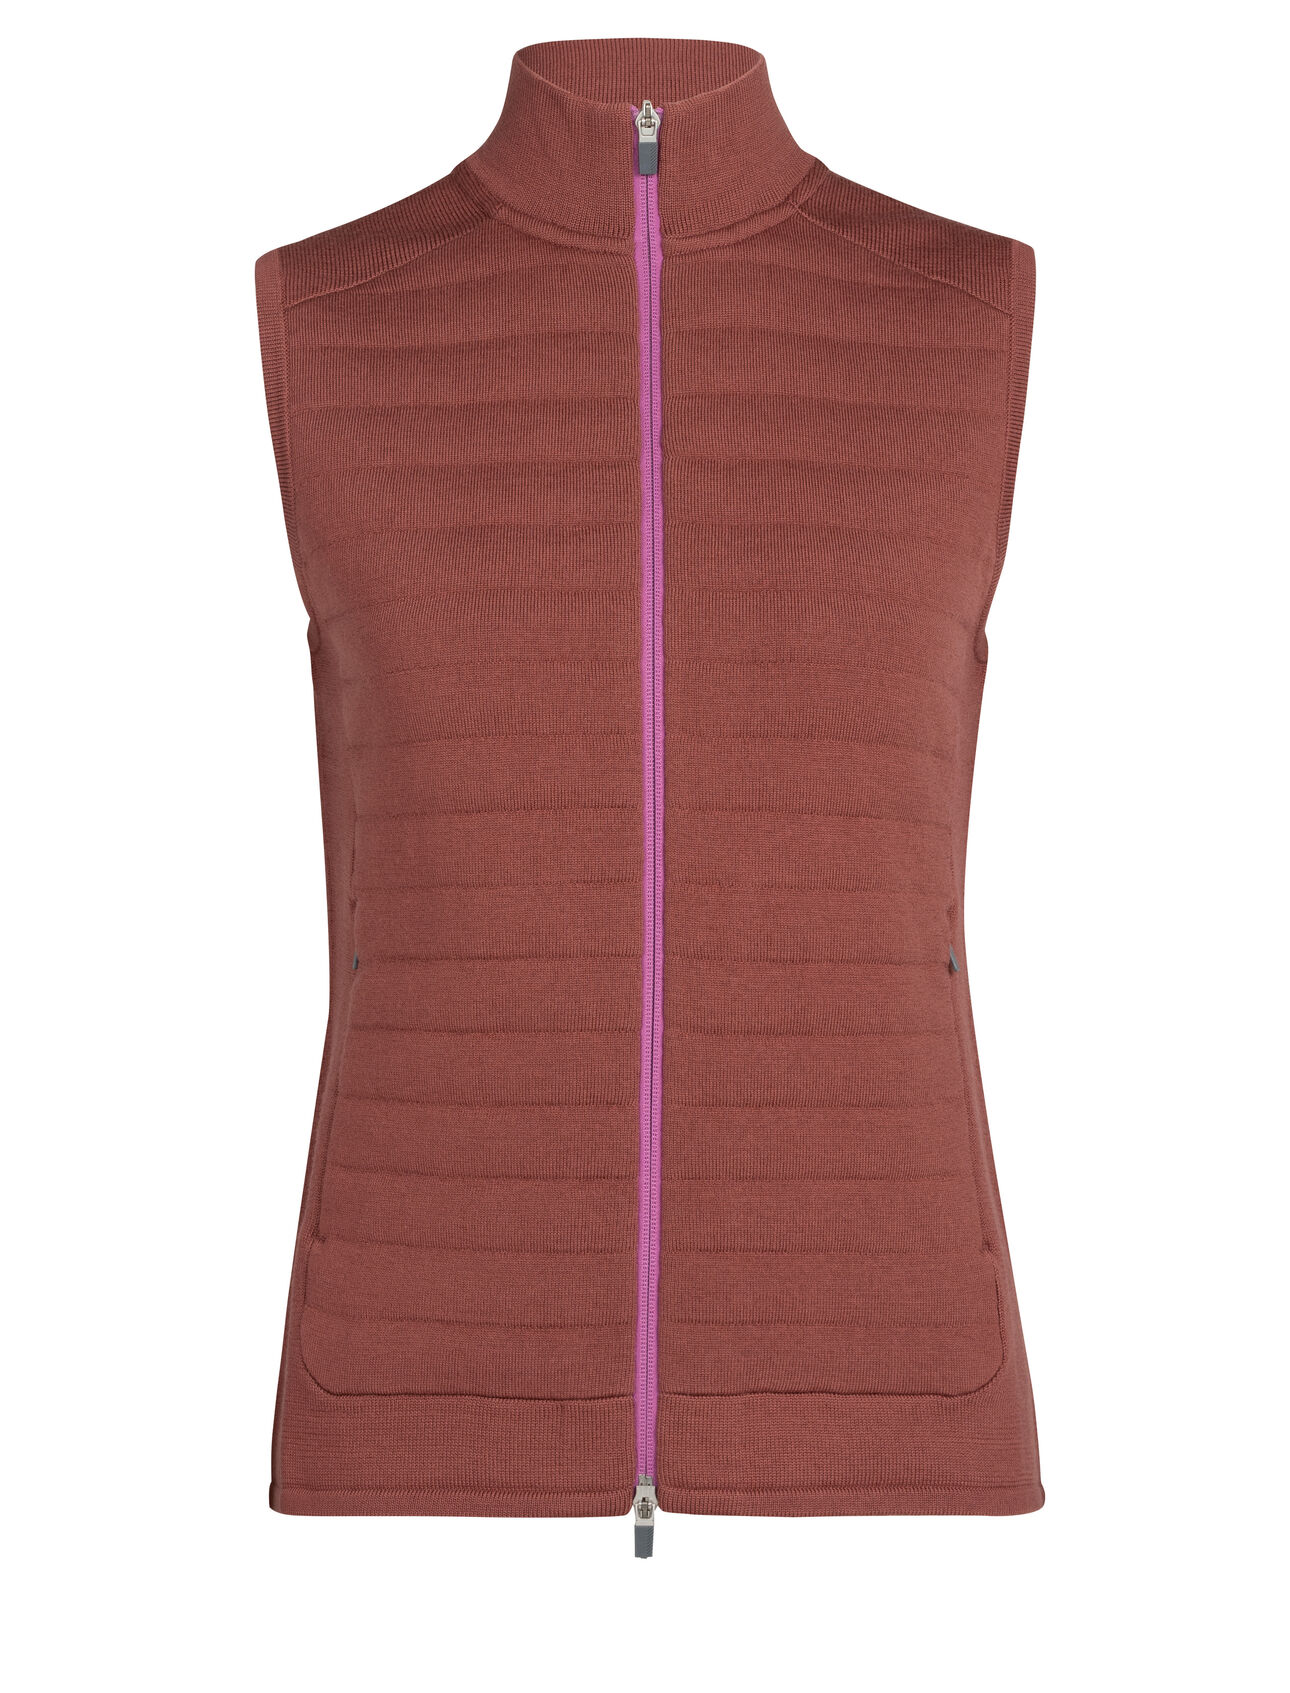 Womens ZoneKnit™ Merino Insulated Vest A body-mapped performance vest that’s ideal for high-output mountain adventures, the ZoneKnit™ Insulated Vest features 100% merino wool for all-natural warmth and temperature regulation.